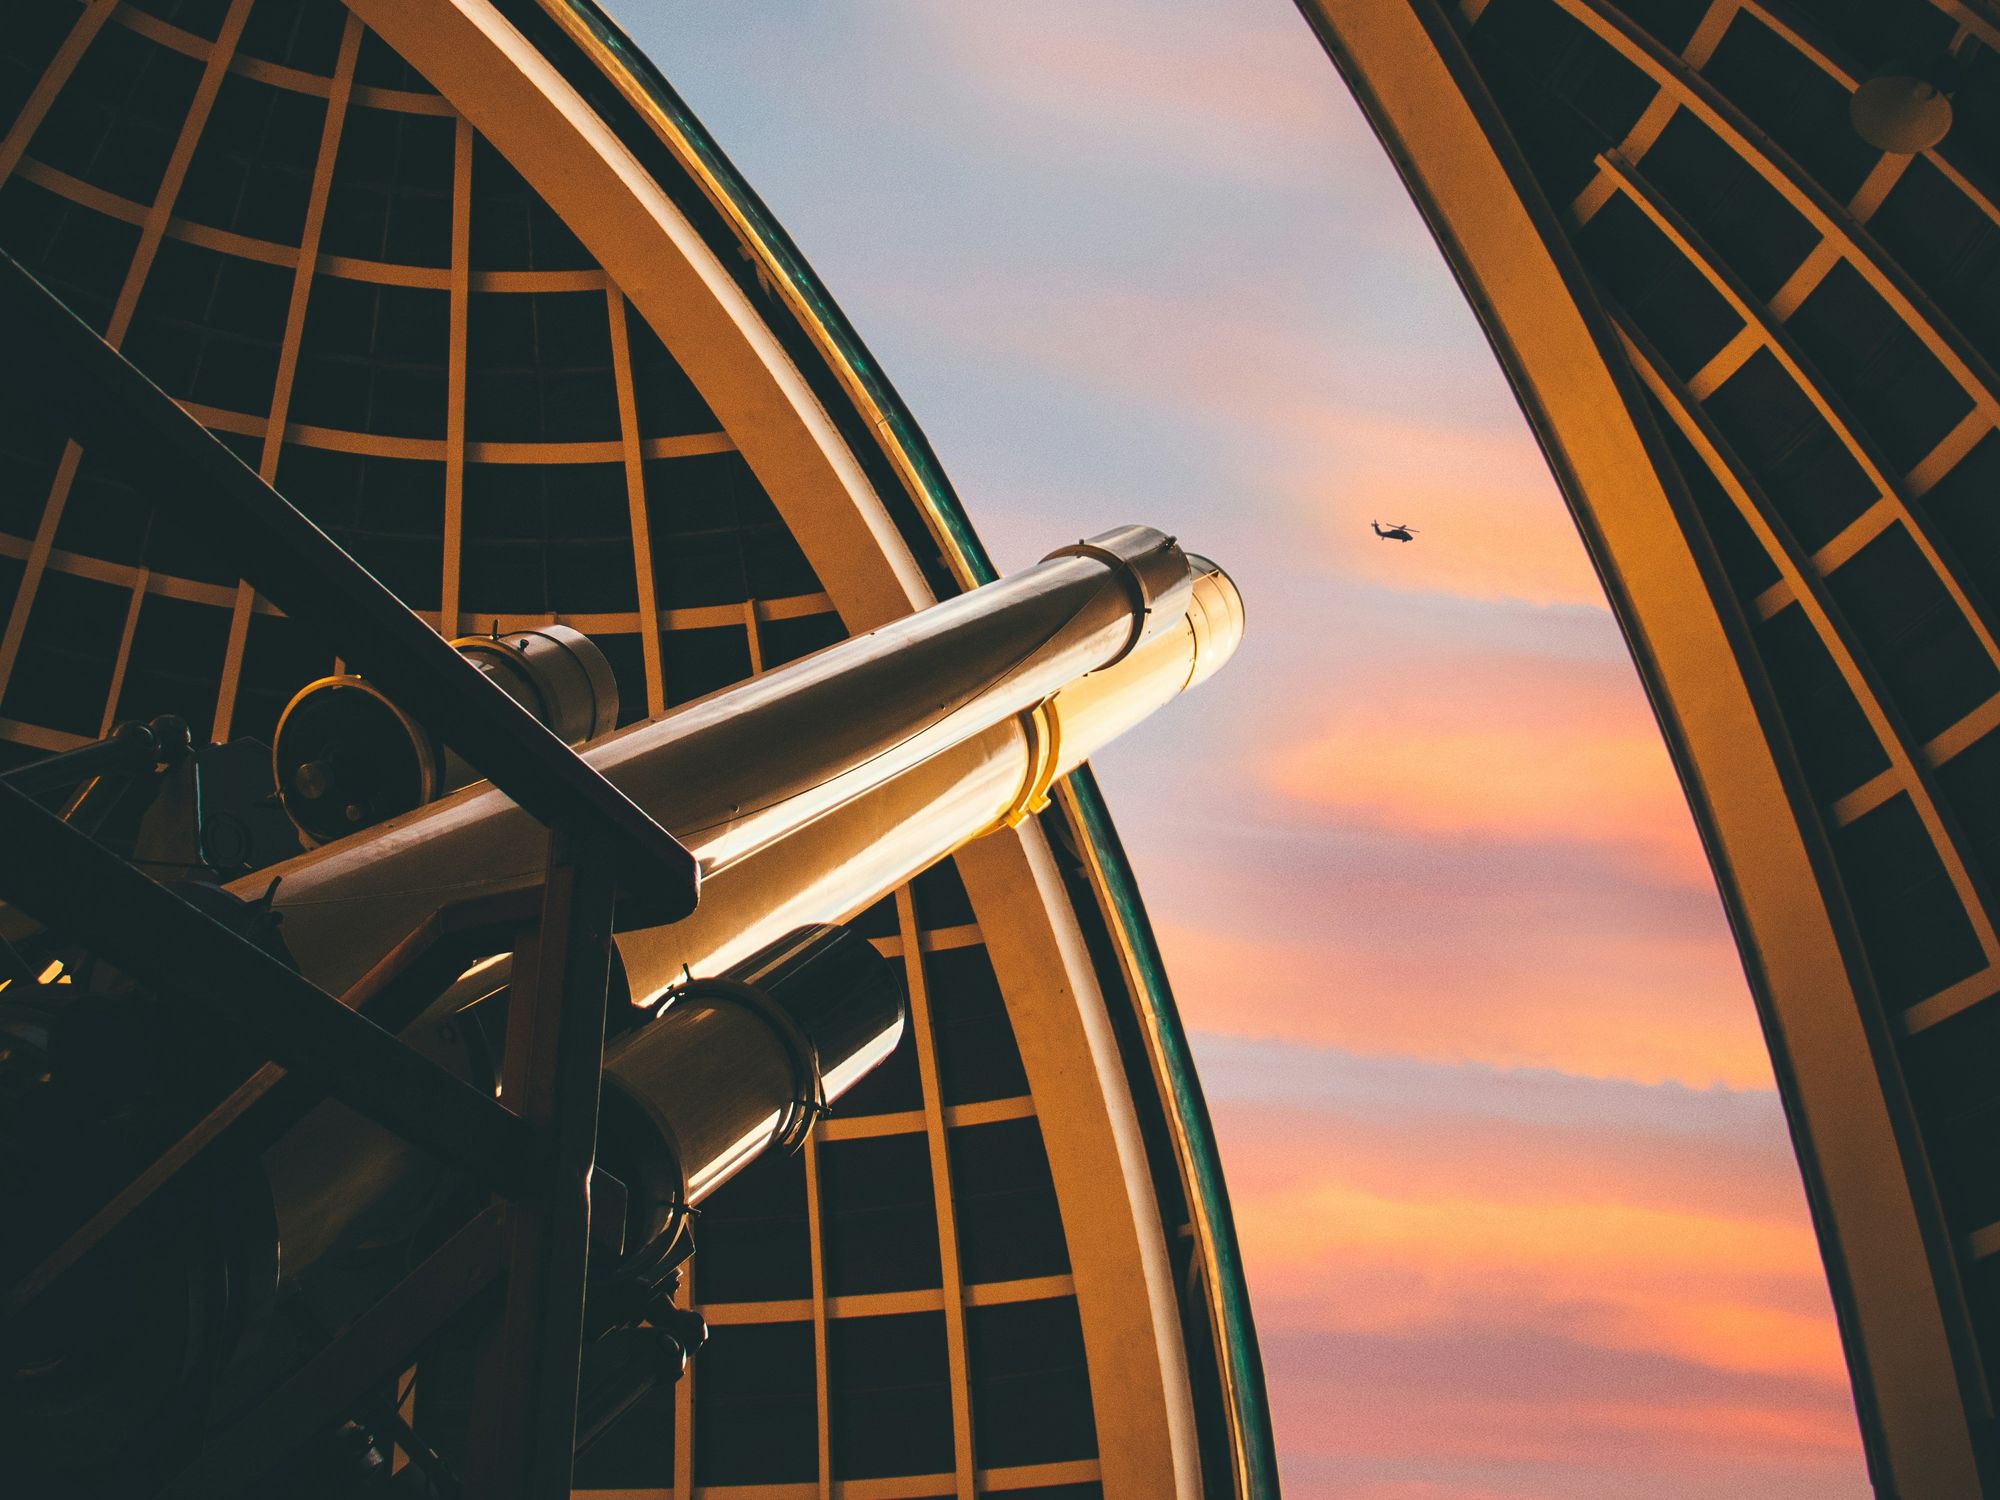 telescope pointed at the sky